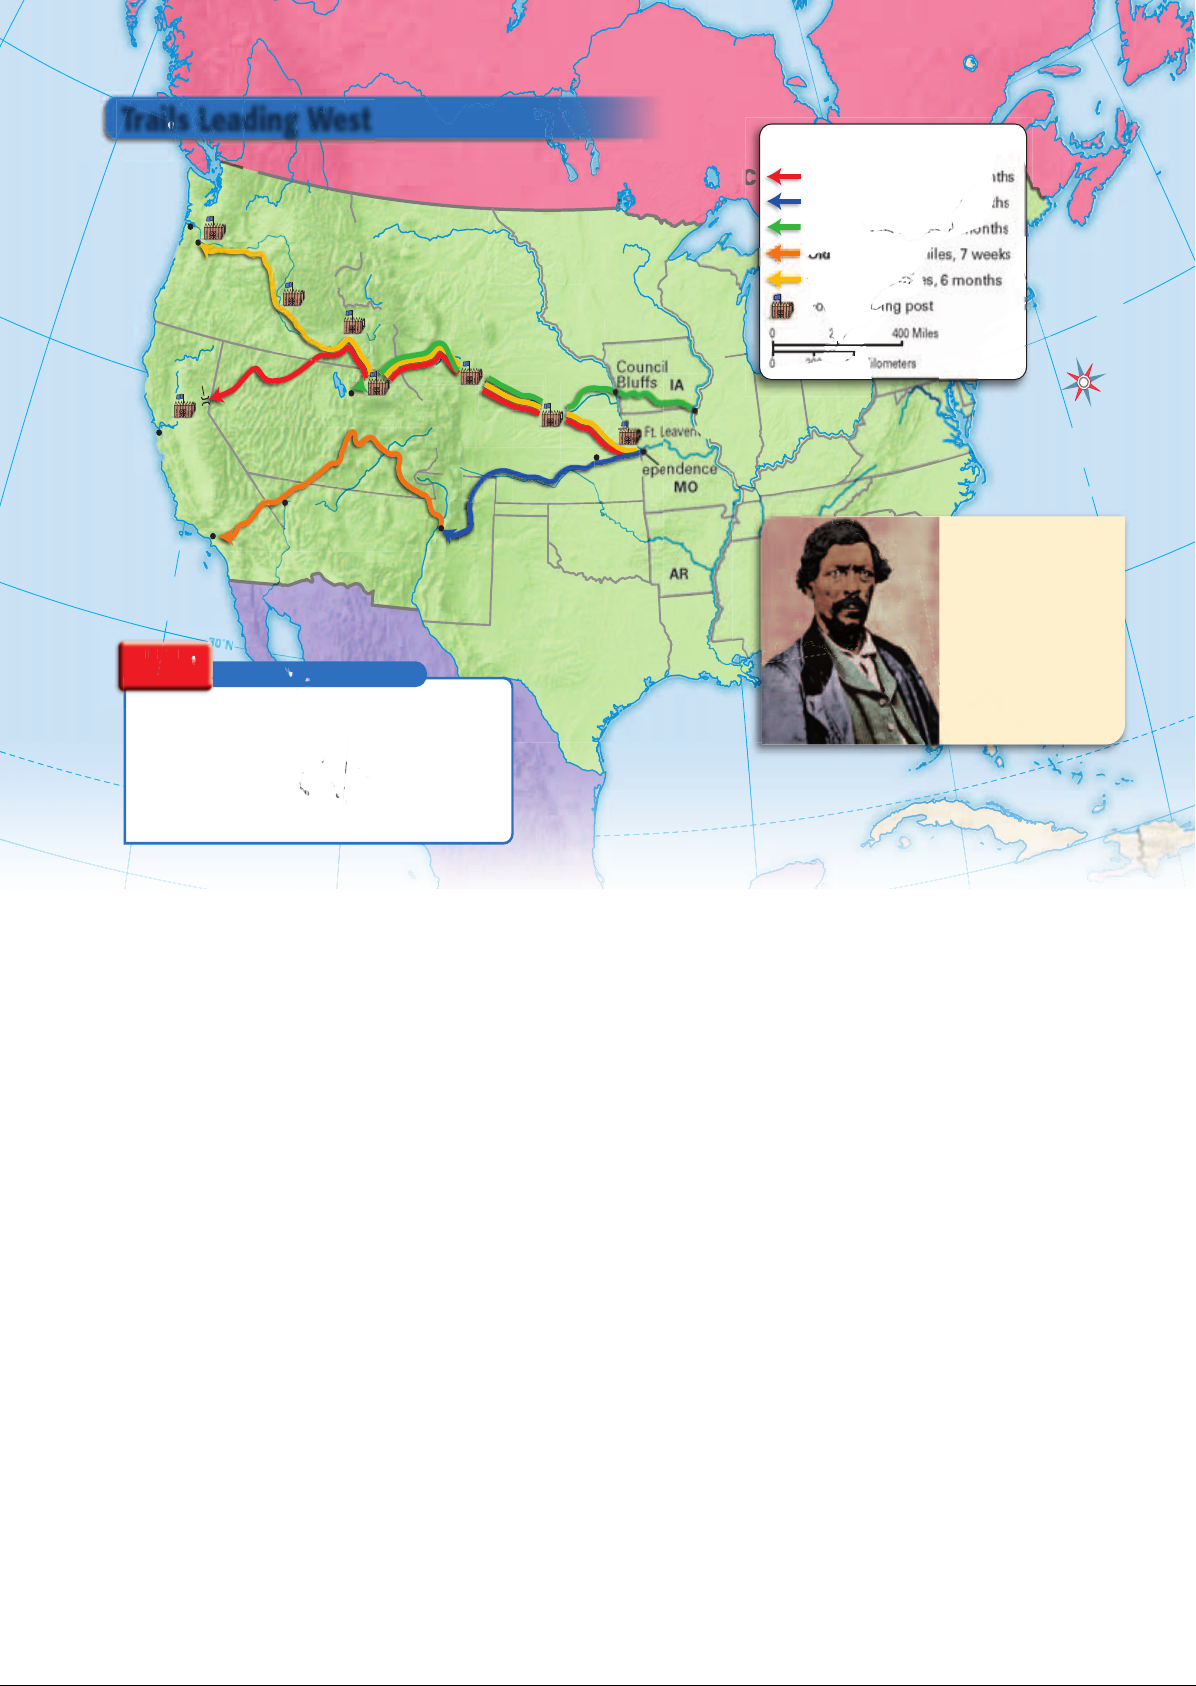 US_History_Textbook_8th_Grade_Chapter_10_Expanding_West_Part_1 Image-3